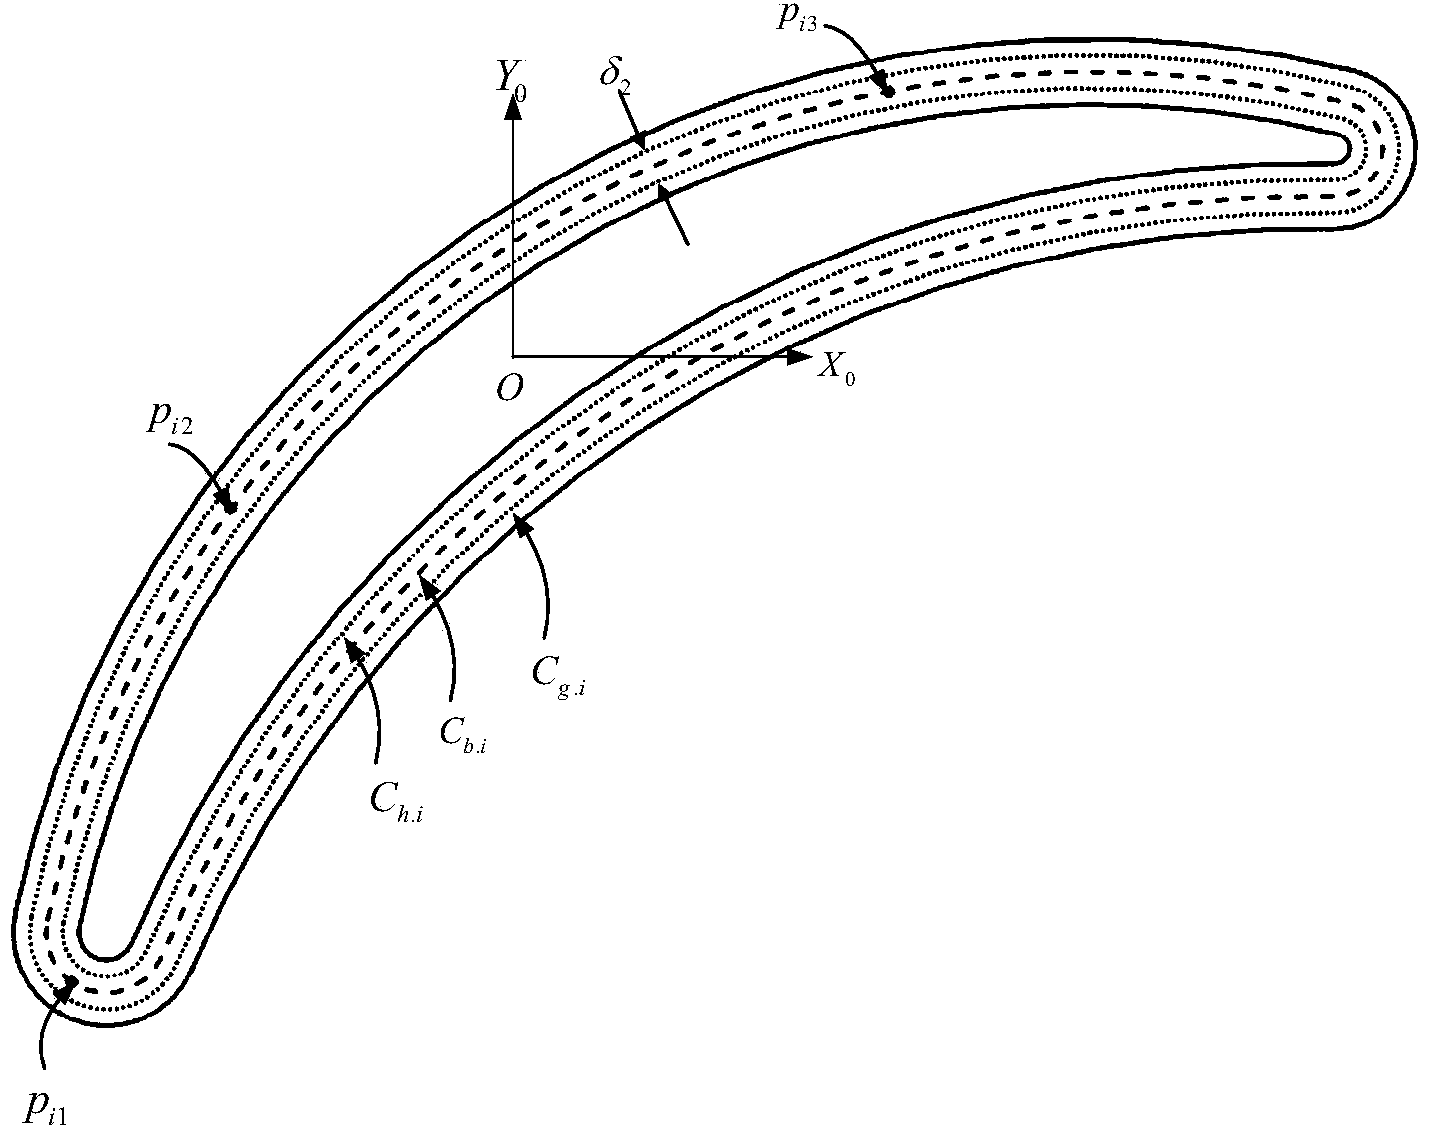 Layered fairing method for complex curved surface